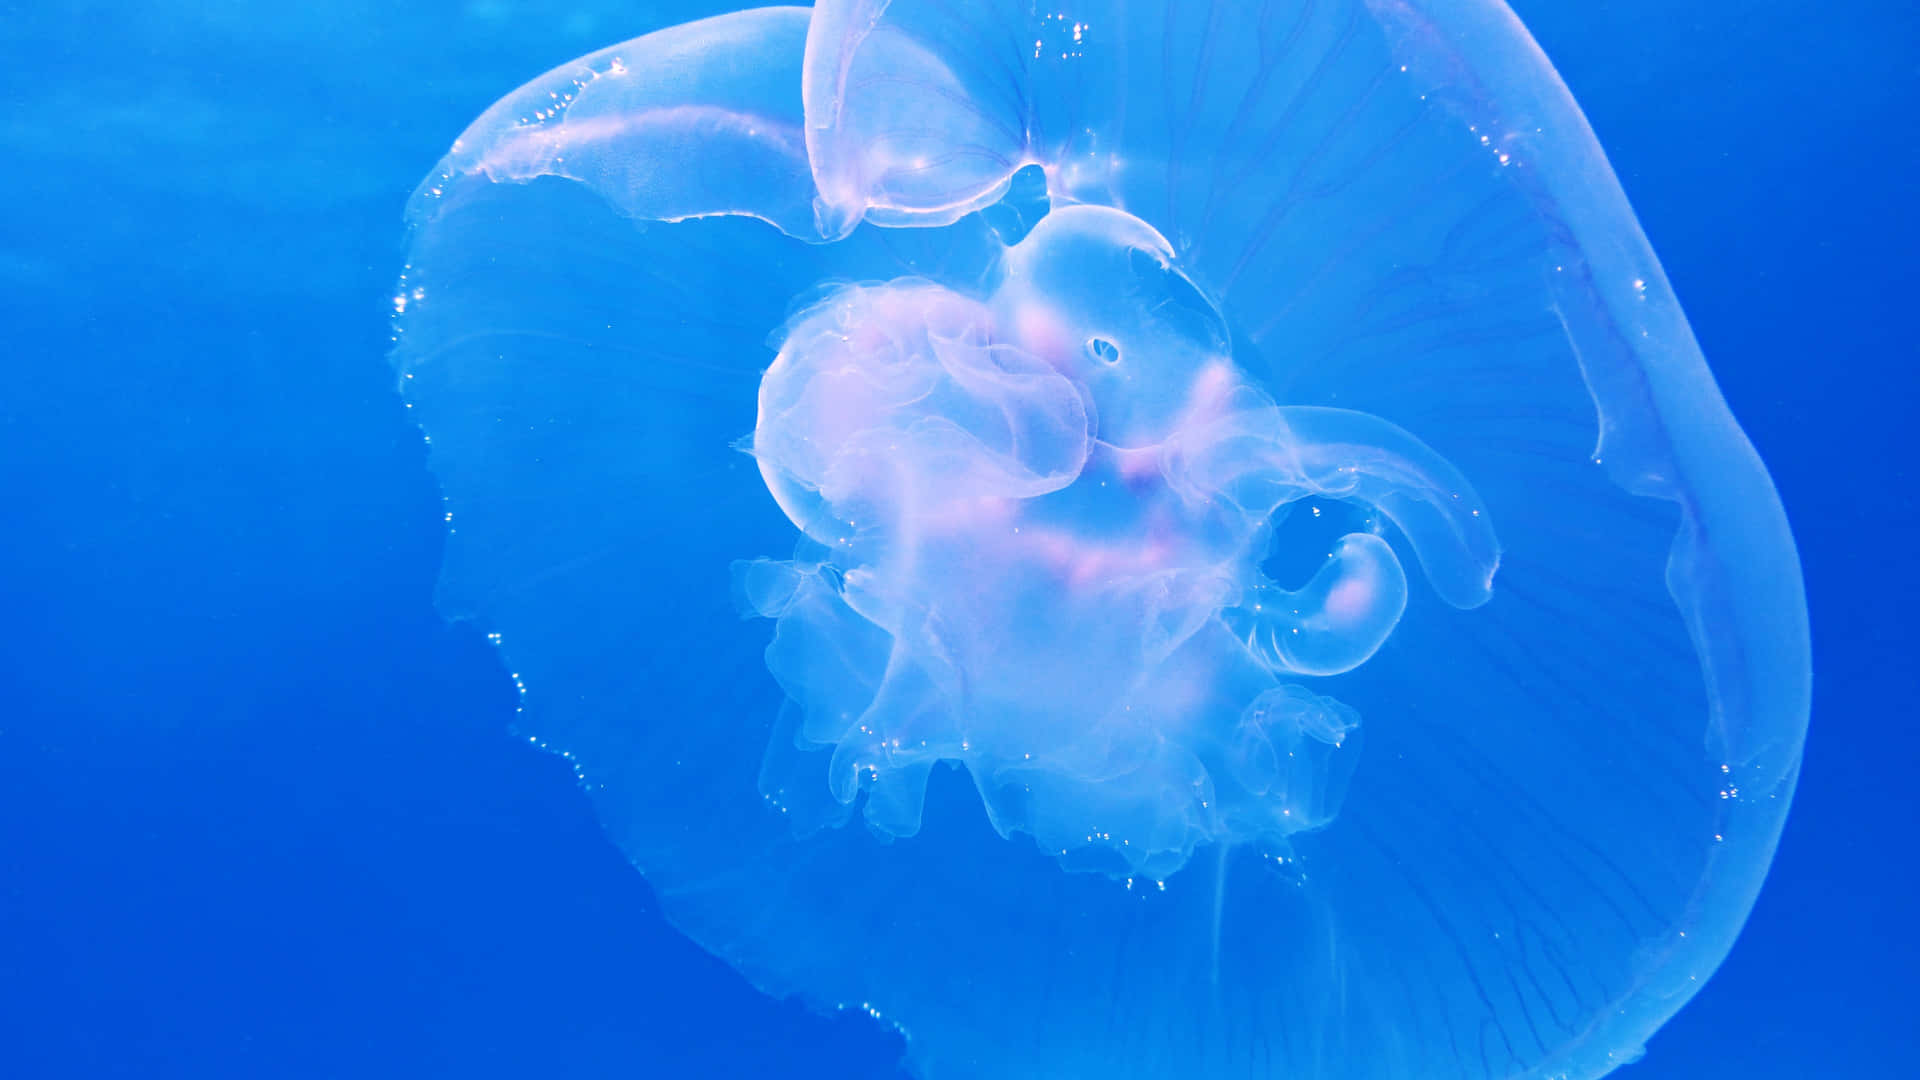 A Vibrant Jellyfish Glows In The Depths Of The Ocean. Background